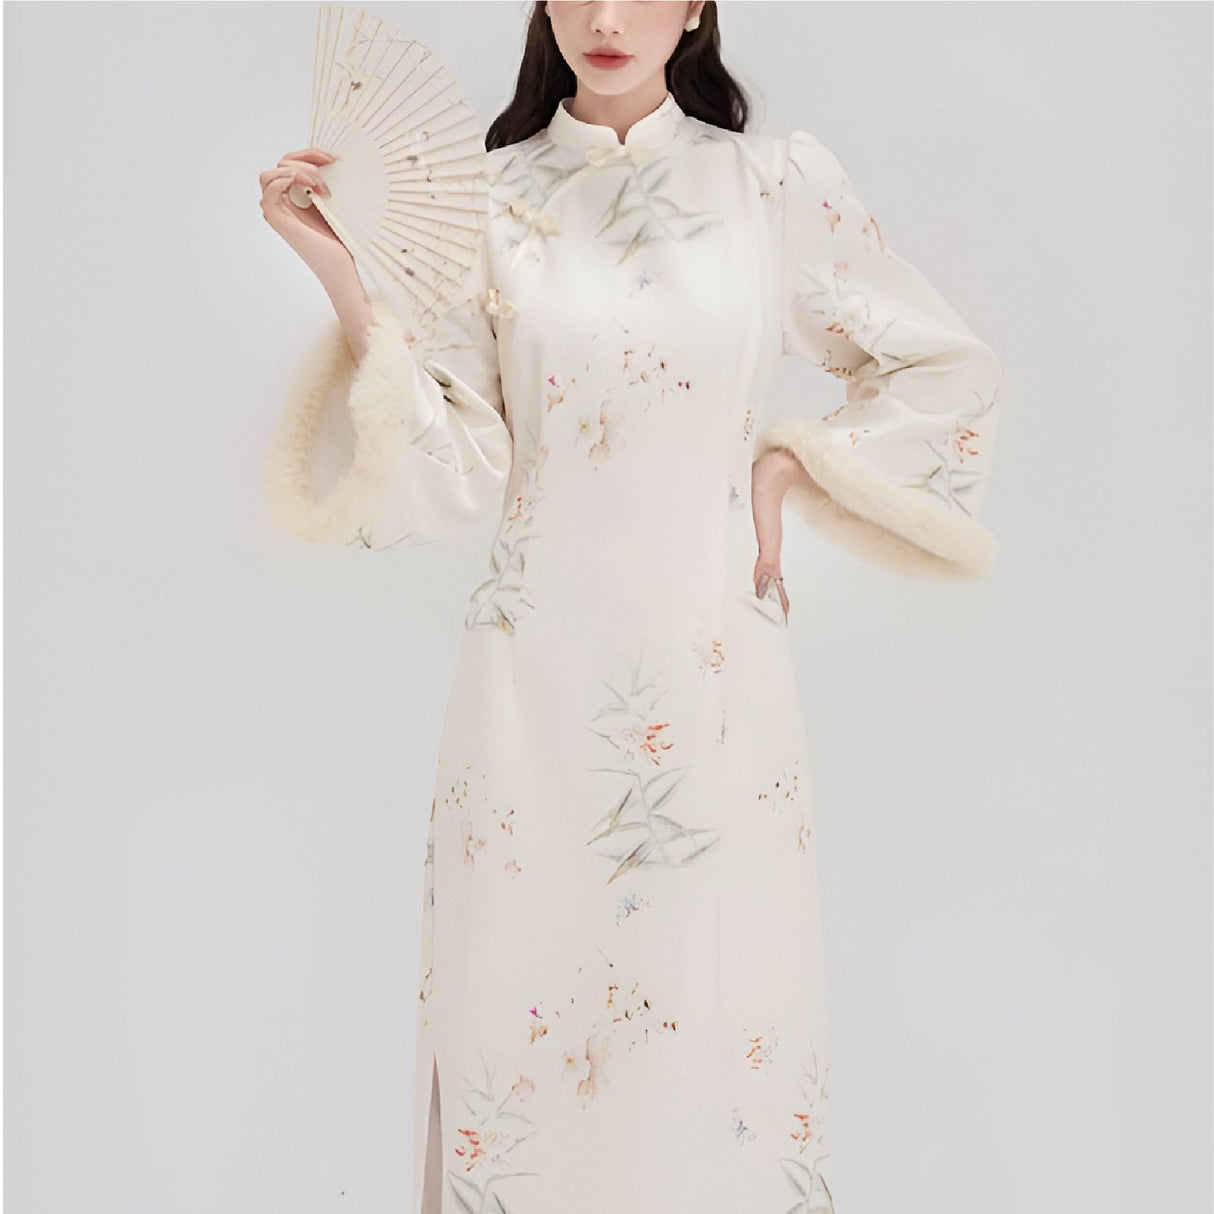 Autumn-Winter Floral Pattern Chinese Qipao